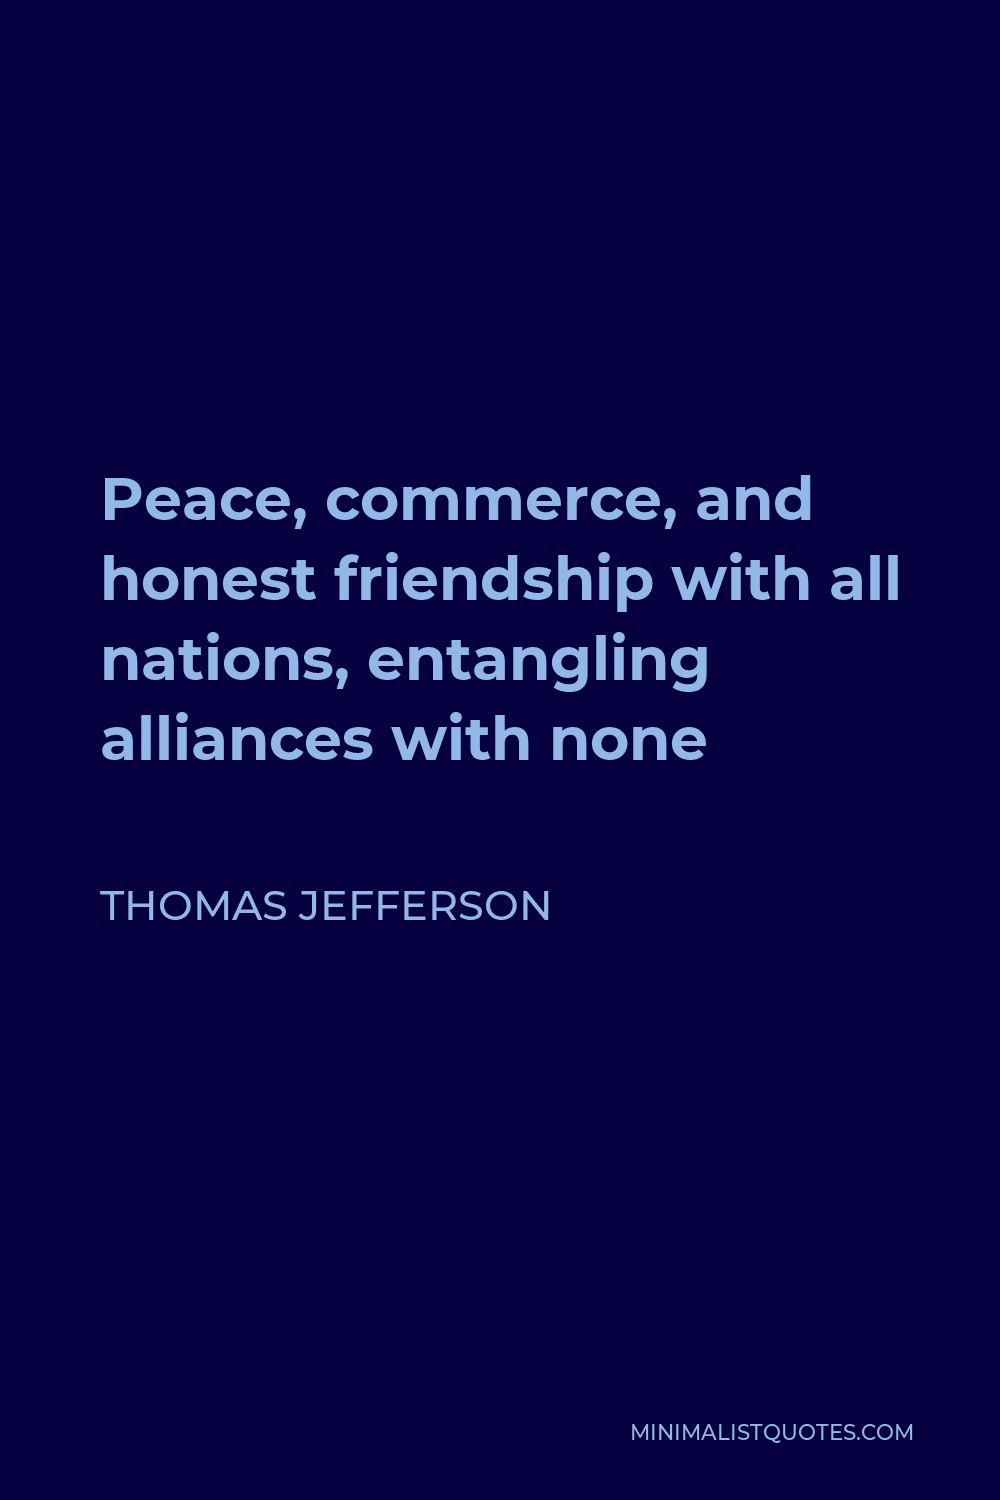 Thomas Jefferson Quote - Peace, commerce, and honest friendship with all nations, entangling alliances with none